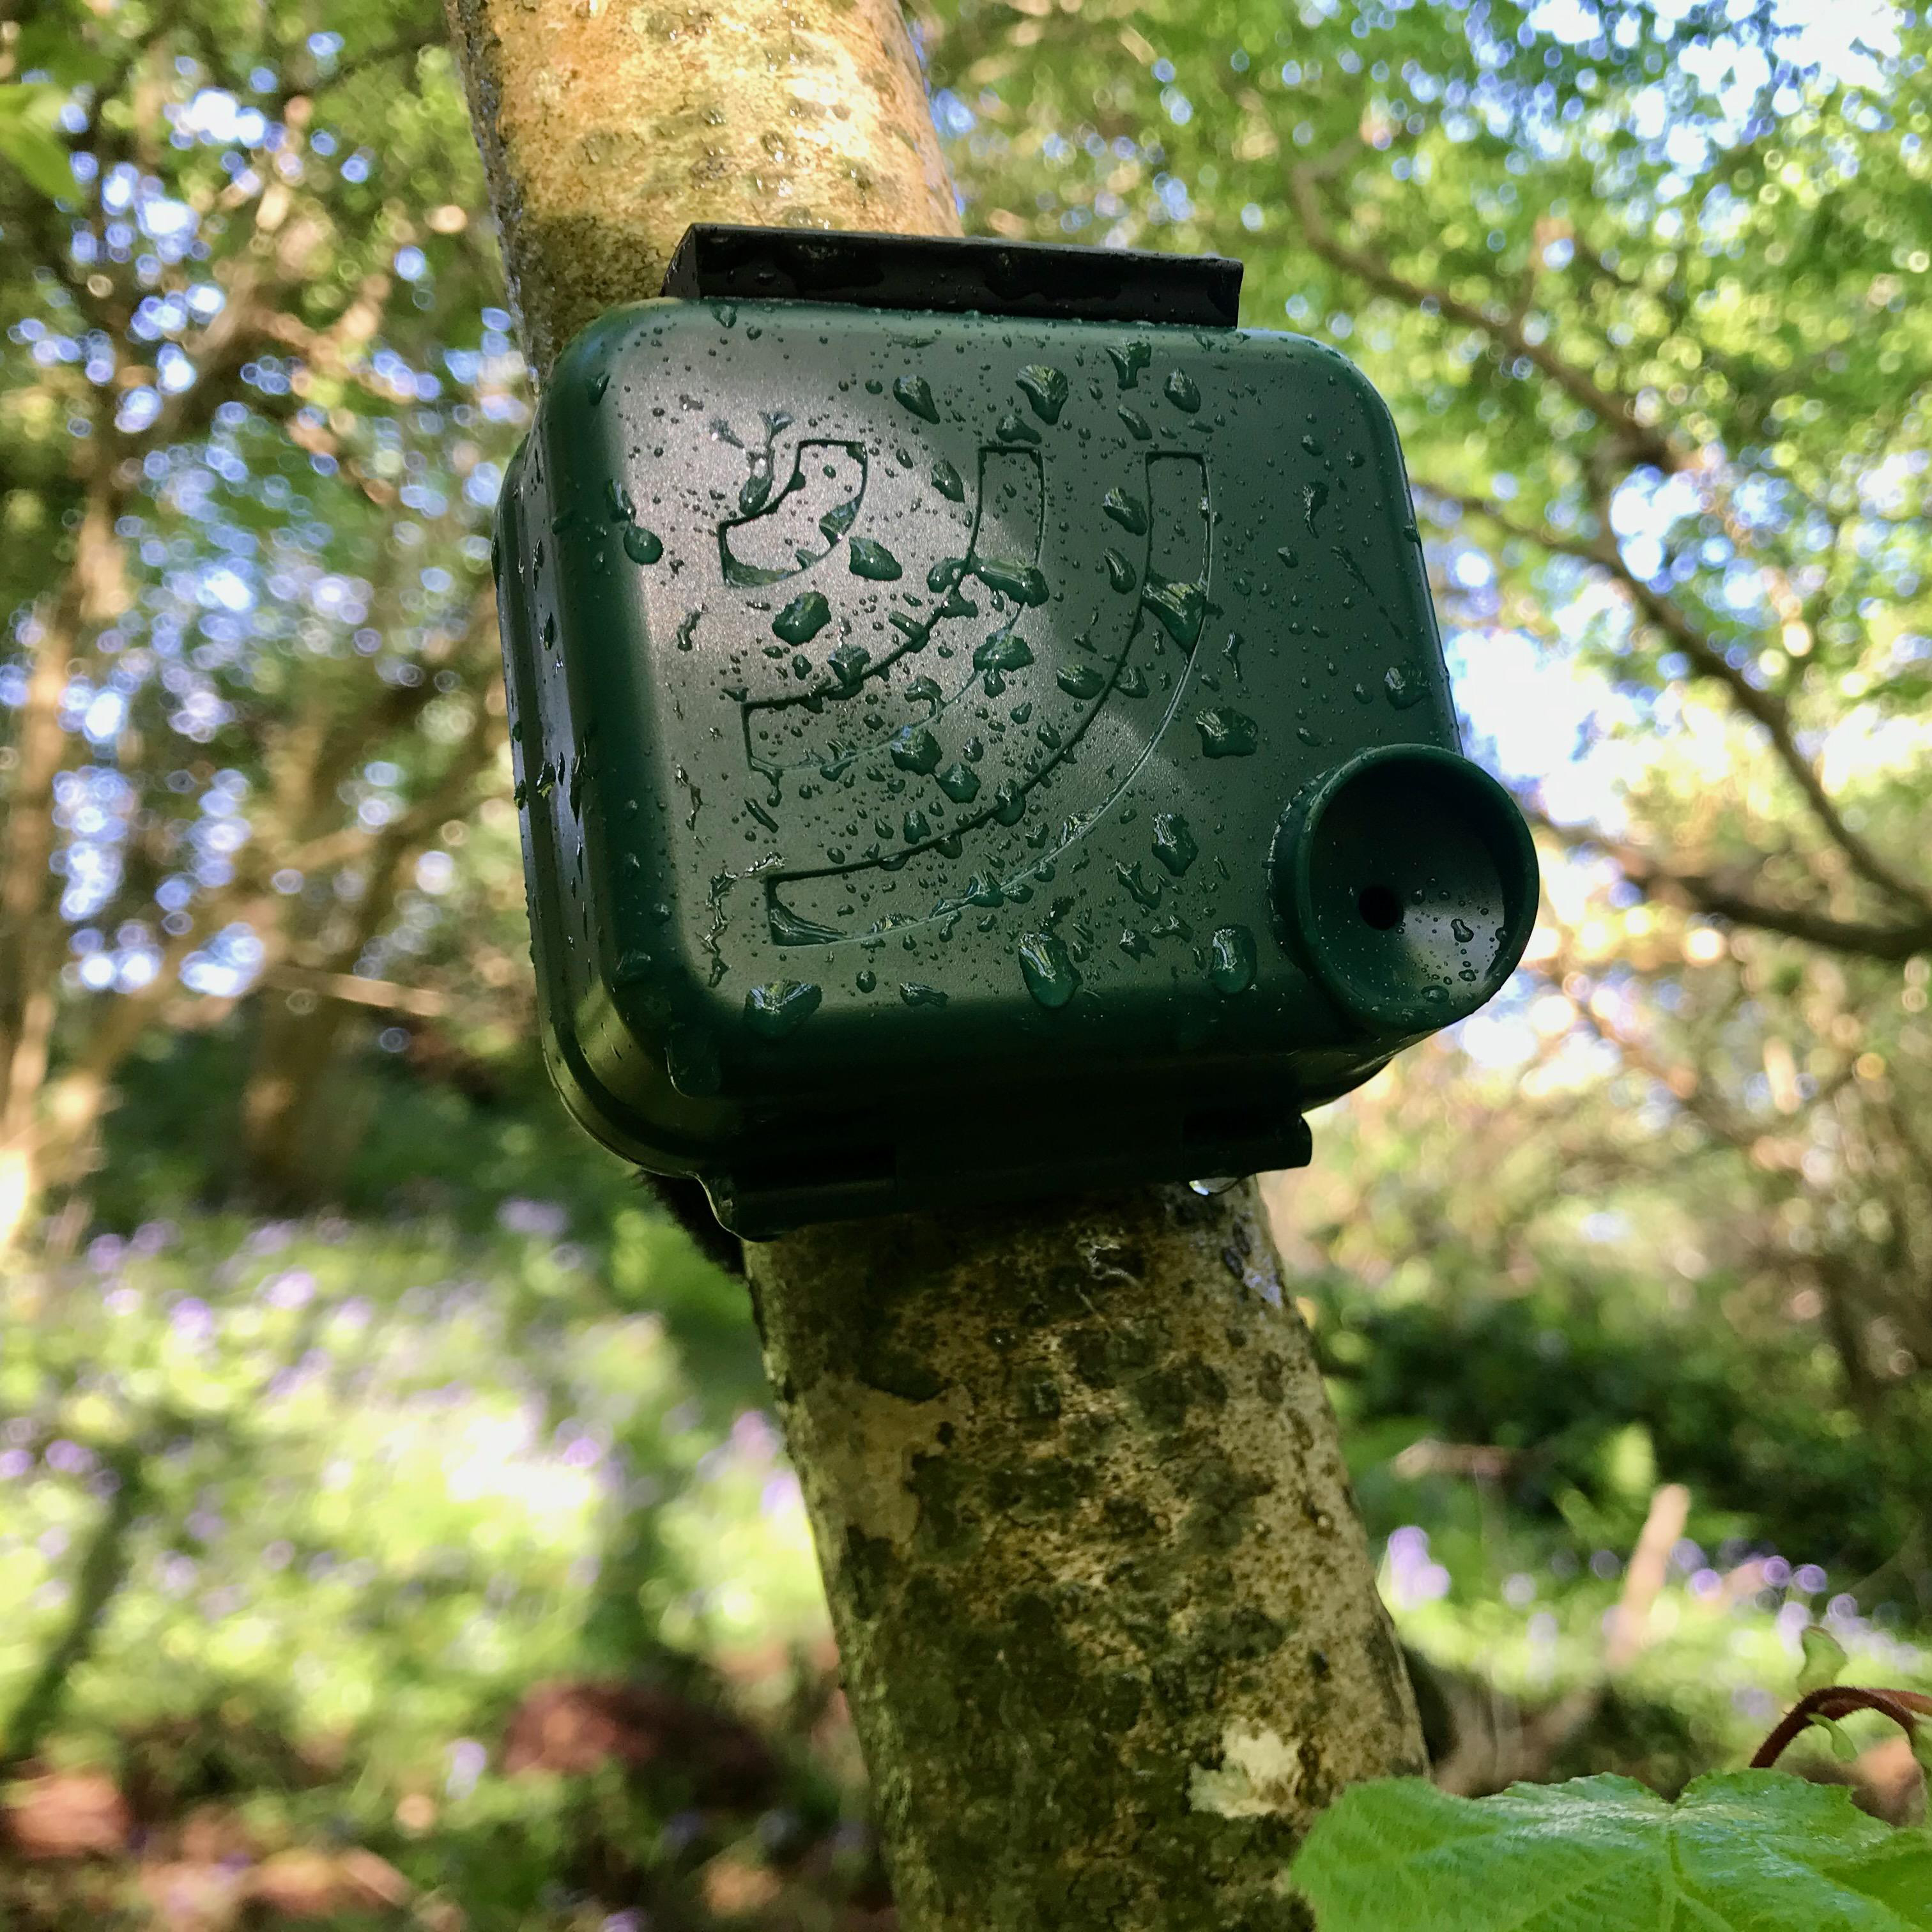 An AudioMoth device in leafy environment. 